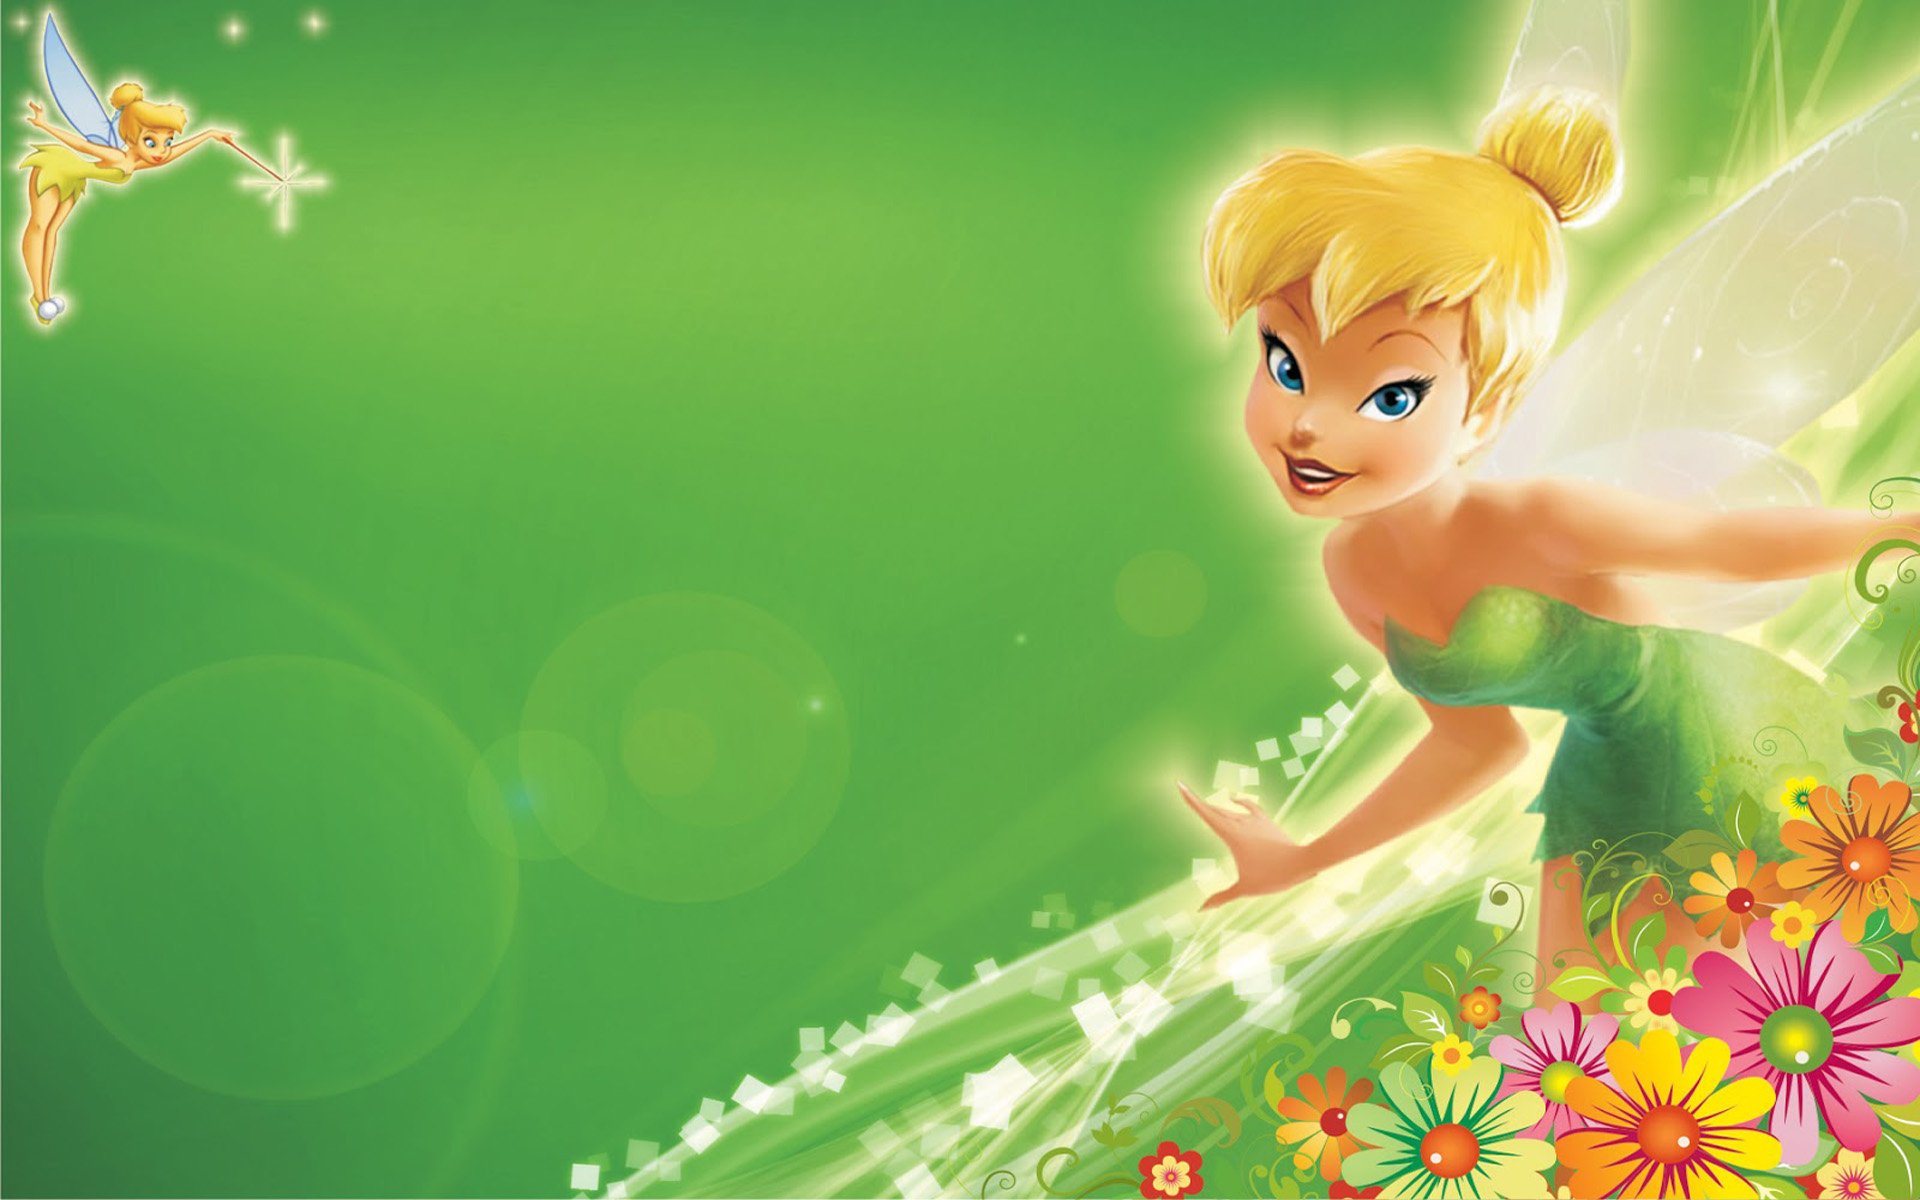 Tinkerbell Green Hd Wallpapers With Flower Decoration For Mobile Phones